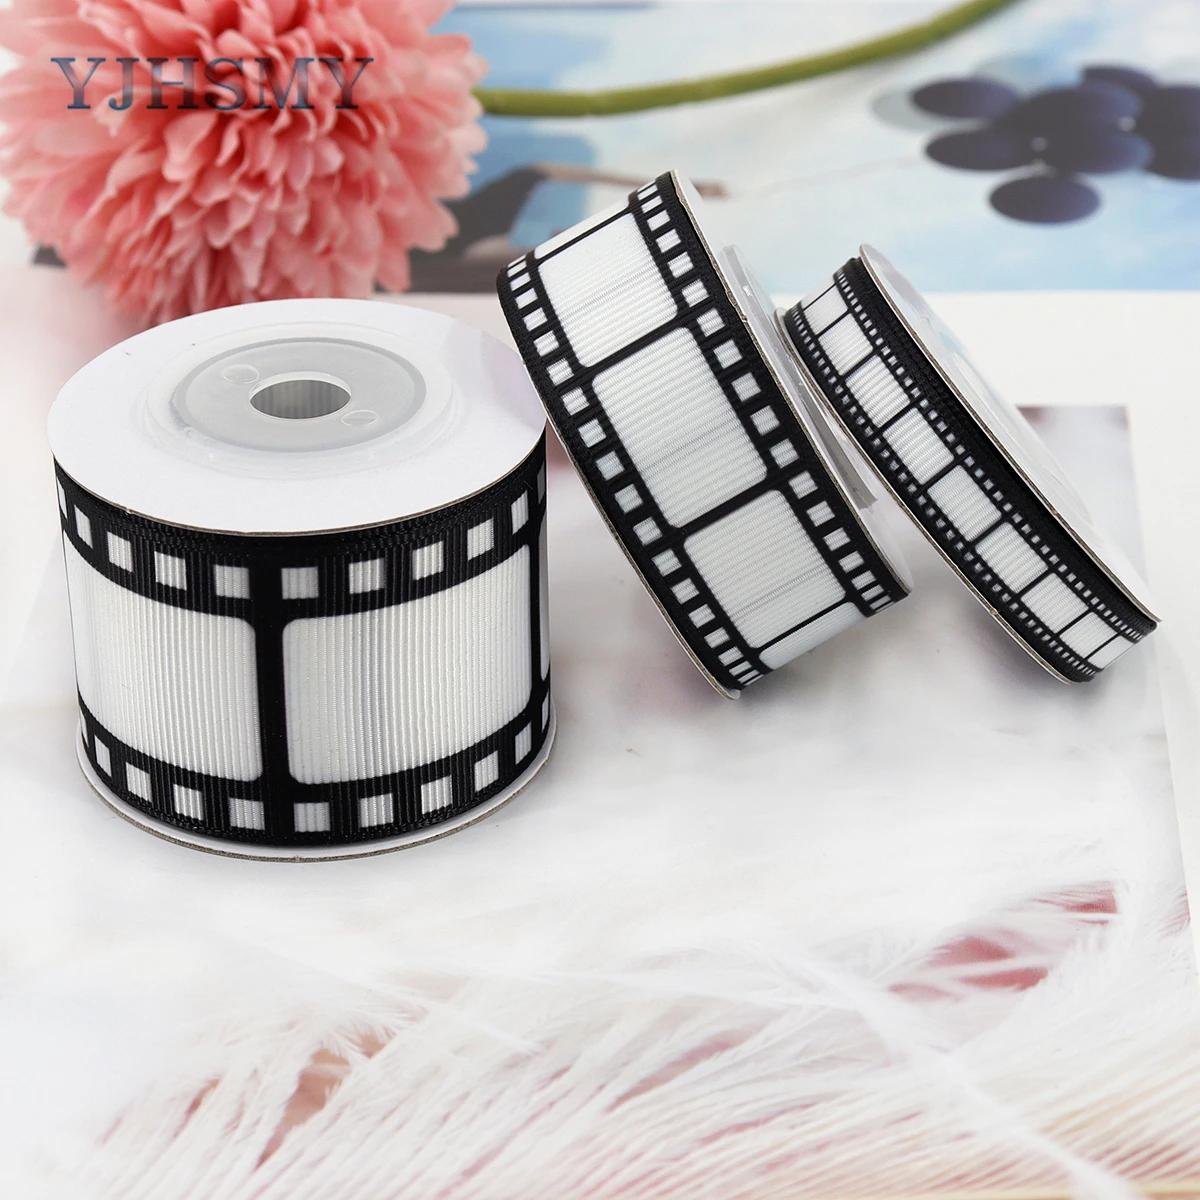 Filmstrip Ribbon Filmstrip Decorating Material Party Accessory for Themed  Party Decor Home DIY Wrapping Wreaths Crafts Christmas - AliExpress